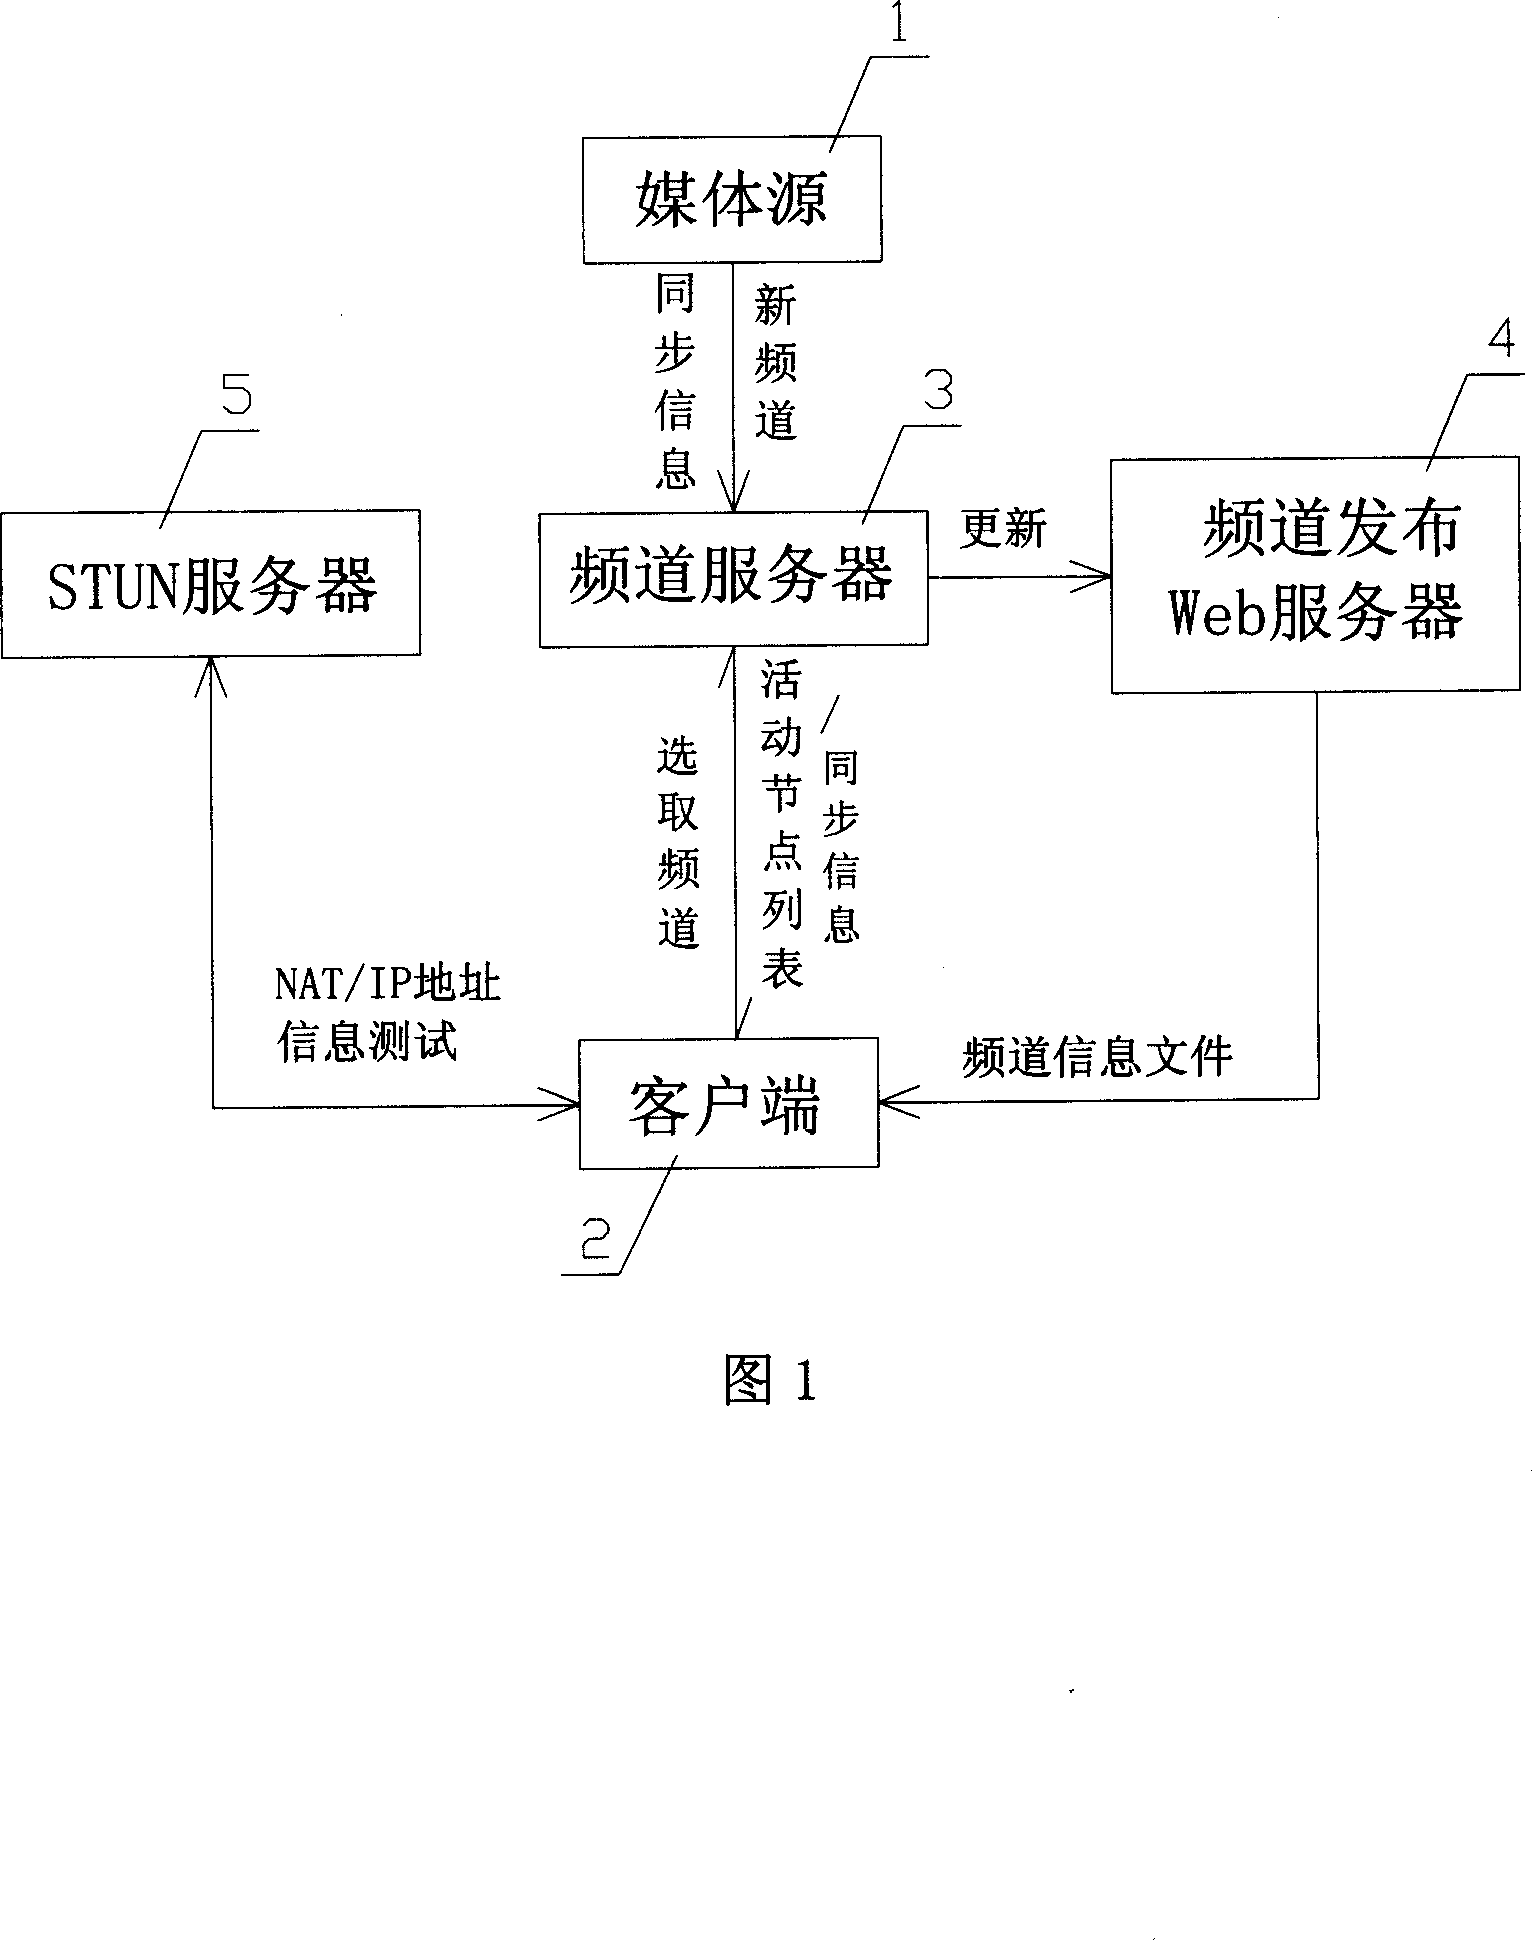 Network flow media data playing method and system